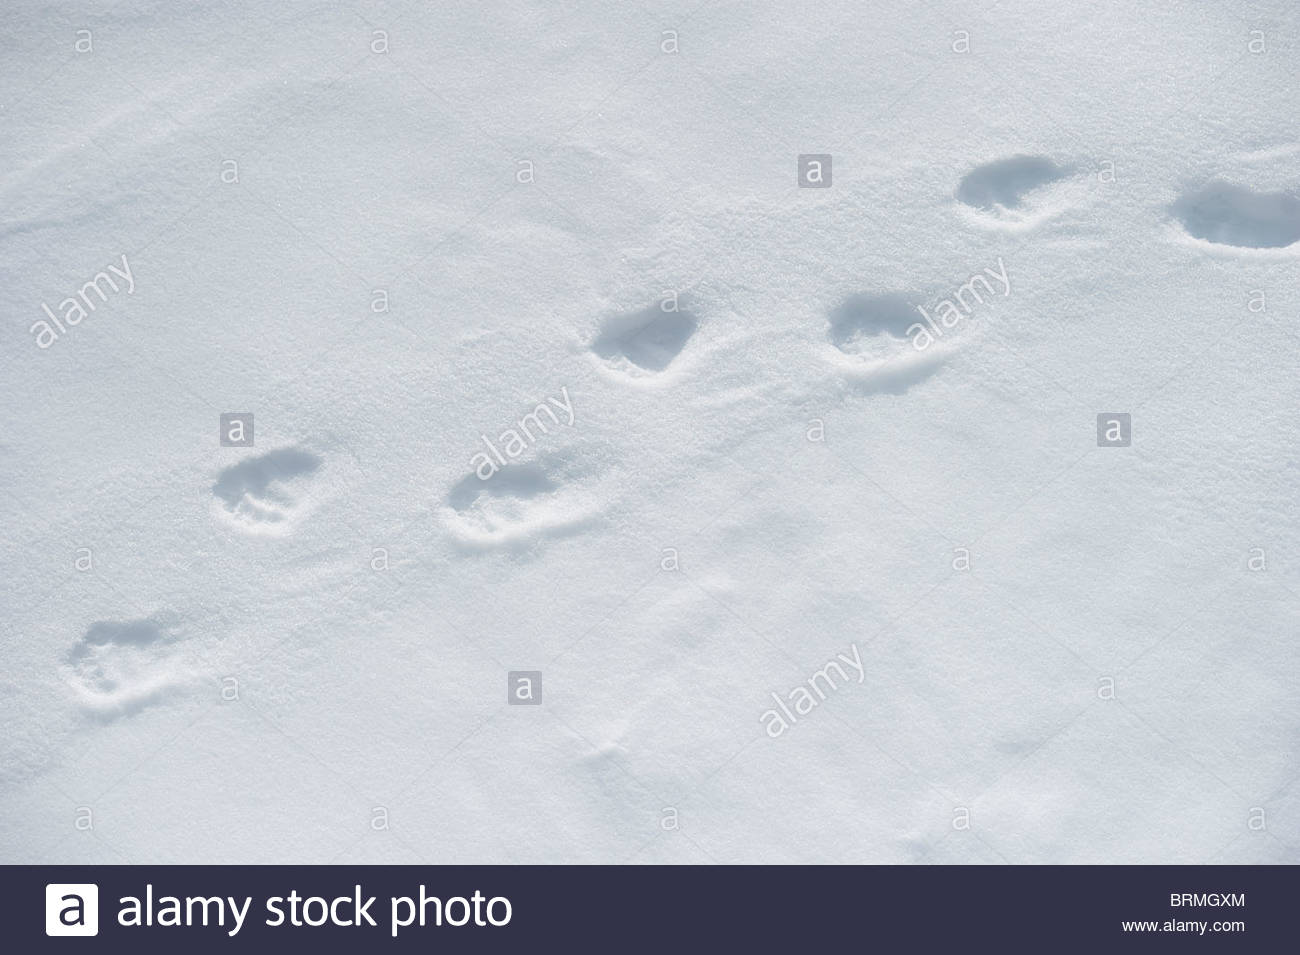 Bear Paw Prints In Snow High Resolution Stock Photography and Images - Alamy